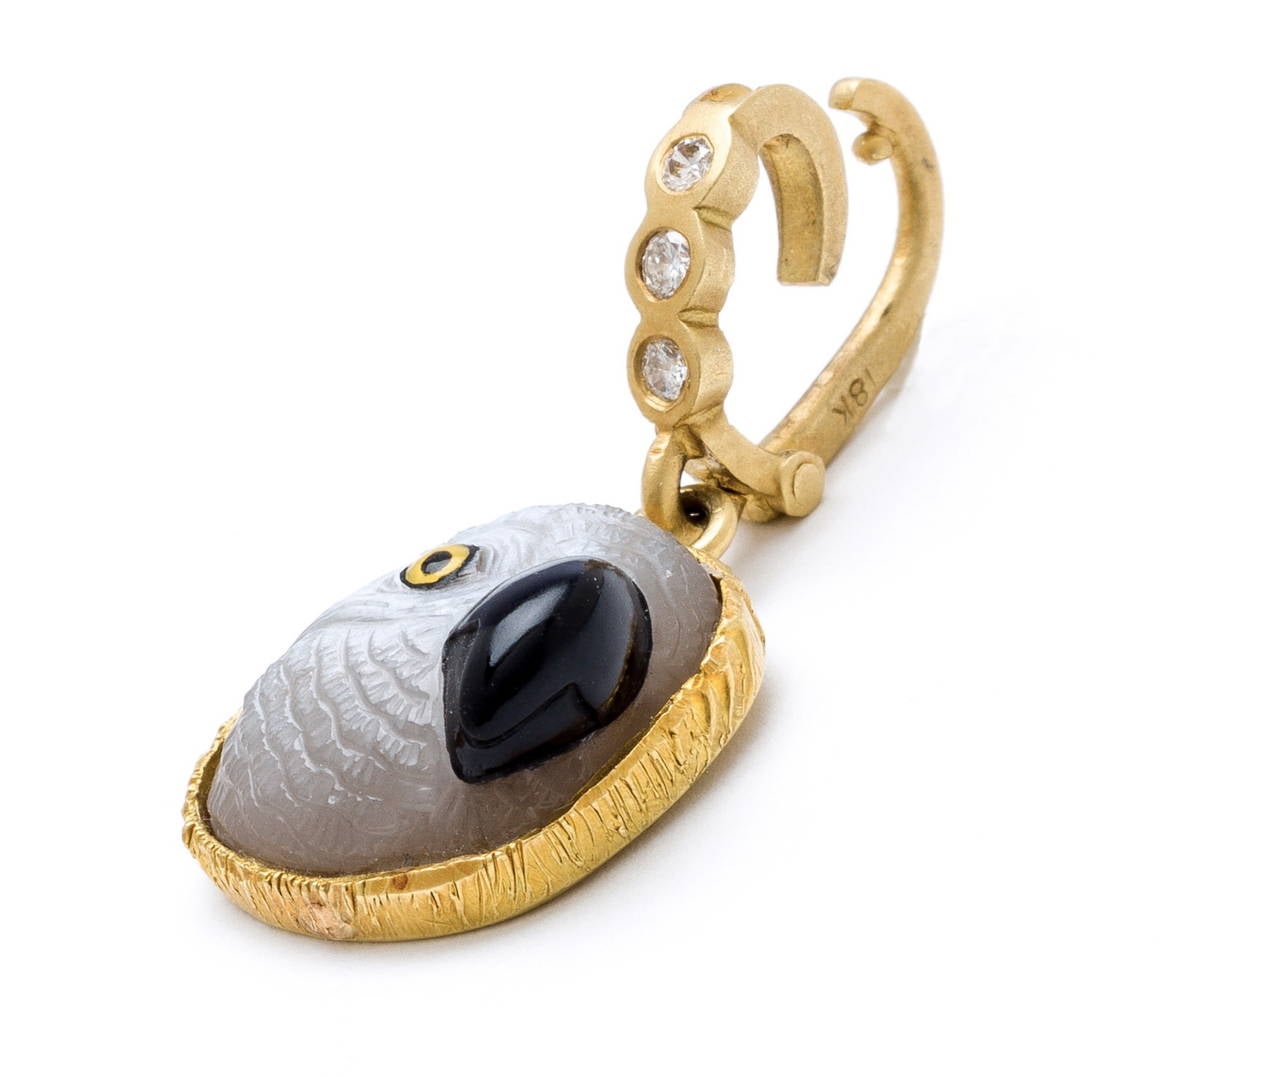 Moonstone hand carved parrot head with beautiful feathered detail (by Master Idar-Oberstein carver) onyx beak and hand painted crystal eye. Set in hand crafted bezel feather design in 18 karat brushed gold with gold and diamond (.30carats) enhancer